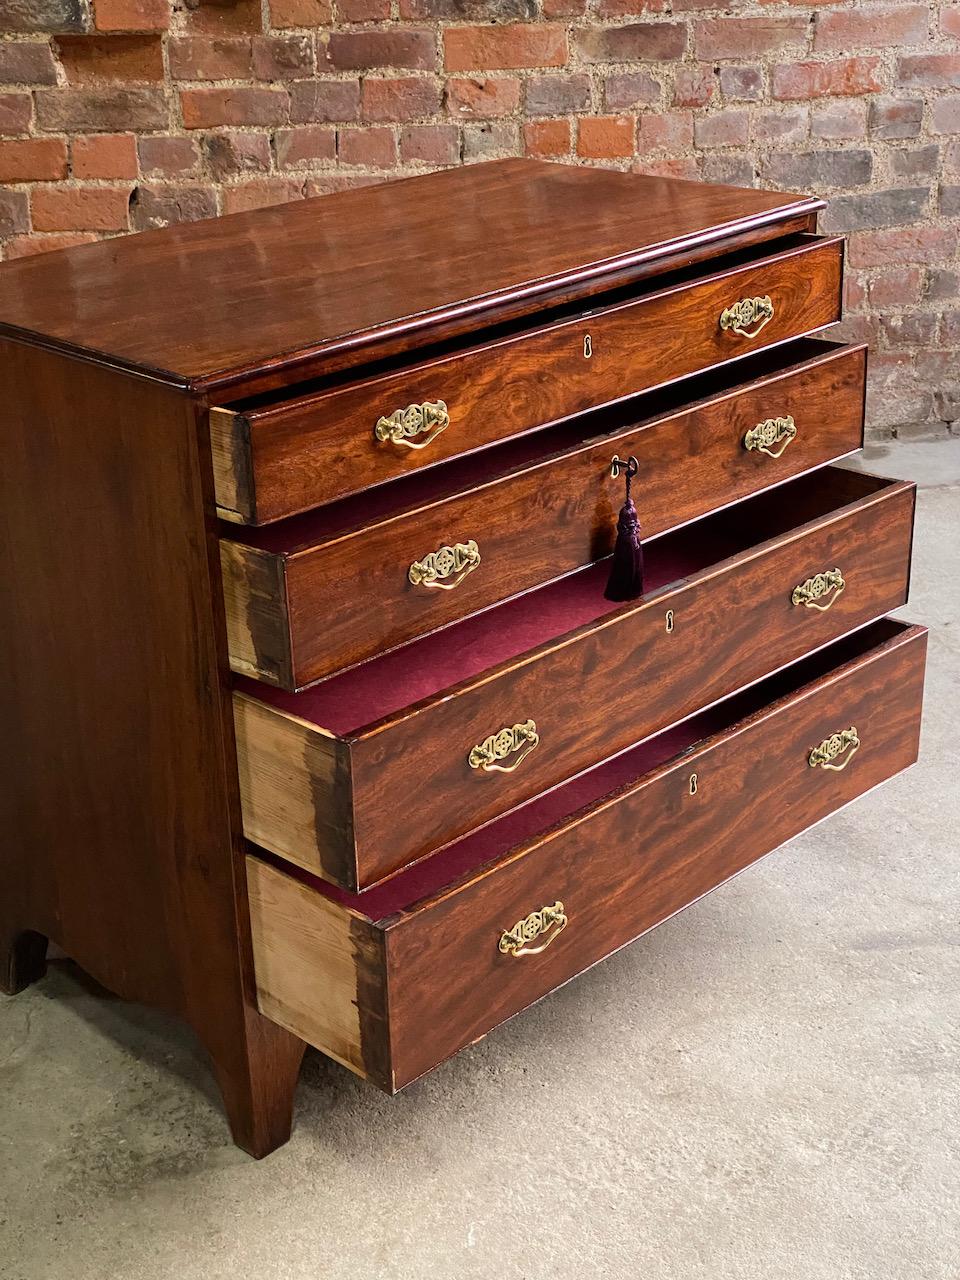 Antique George III Flamed Mahogany Chest of Drawers 19th, Century, circa 1810 In Good Condition For Sale In Longdon, Tewkesbury